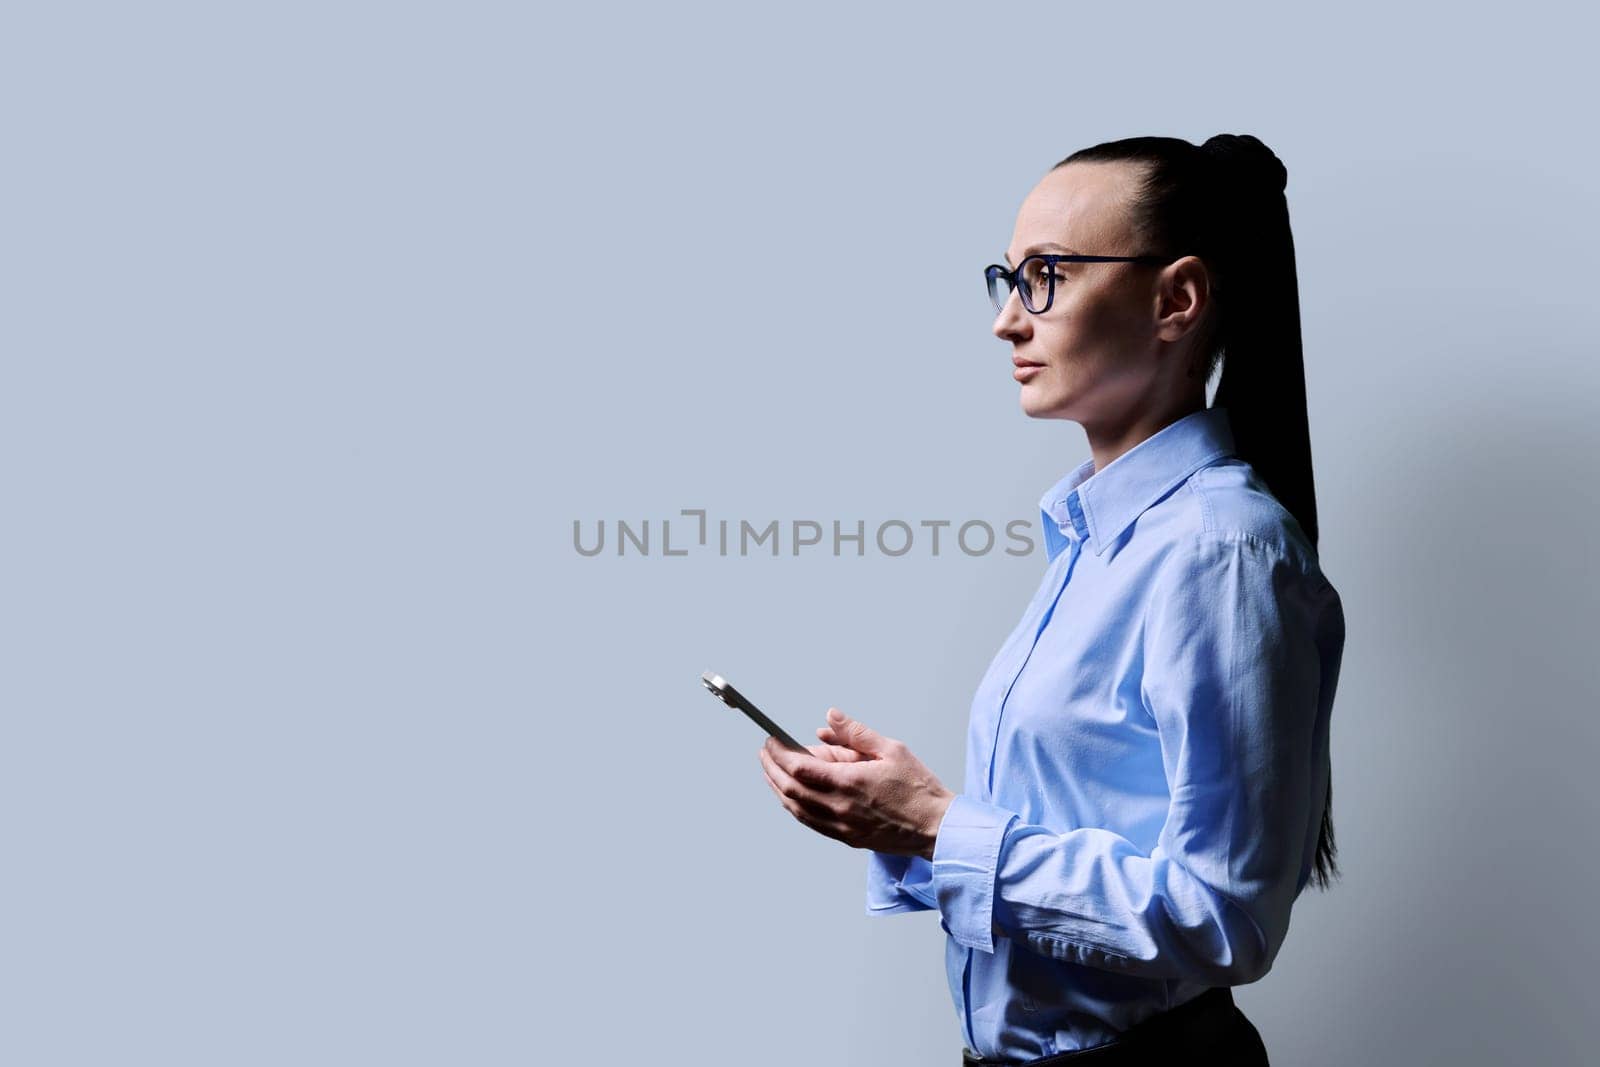 Profile view 30s serious woman using smartphone on grey background. Middle aged female in glasses looking forward. Technologies mobile apps applications internet work business leisure communication